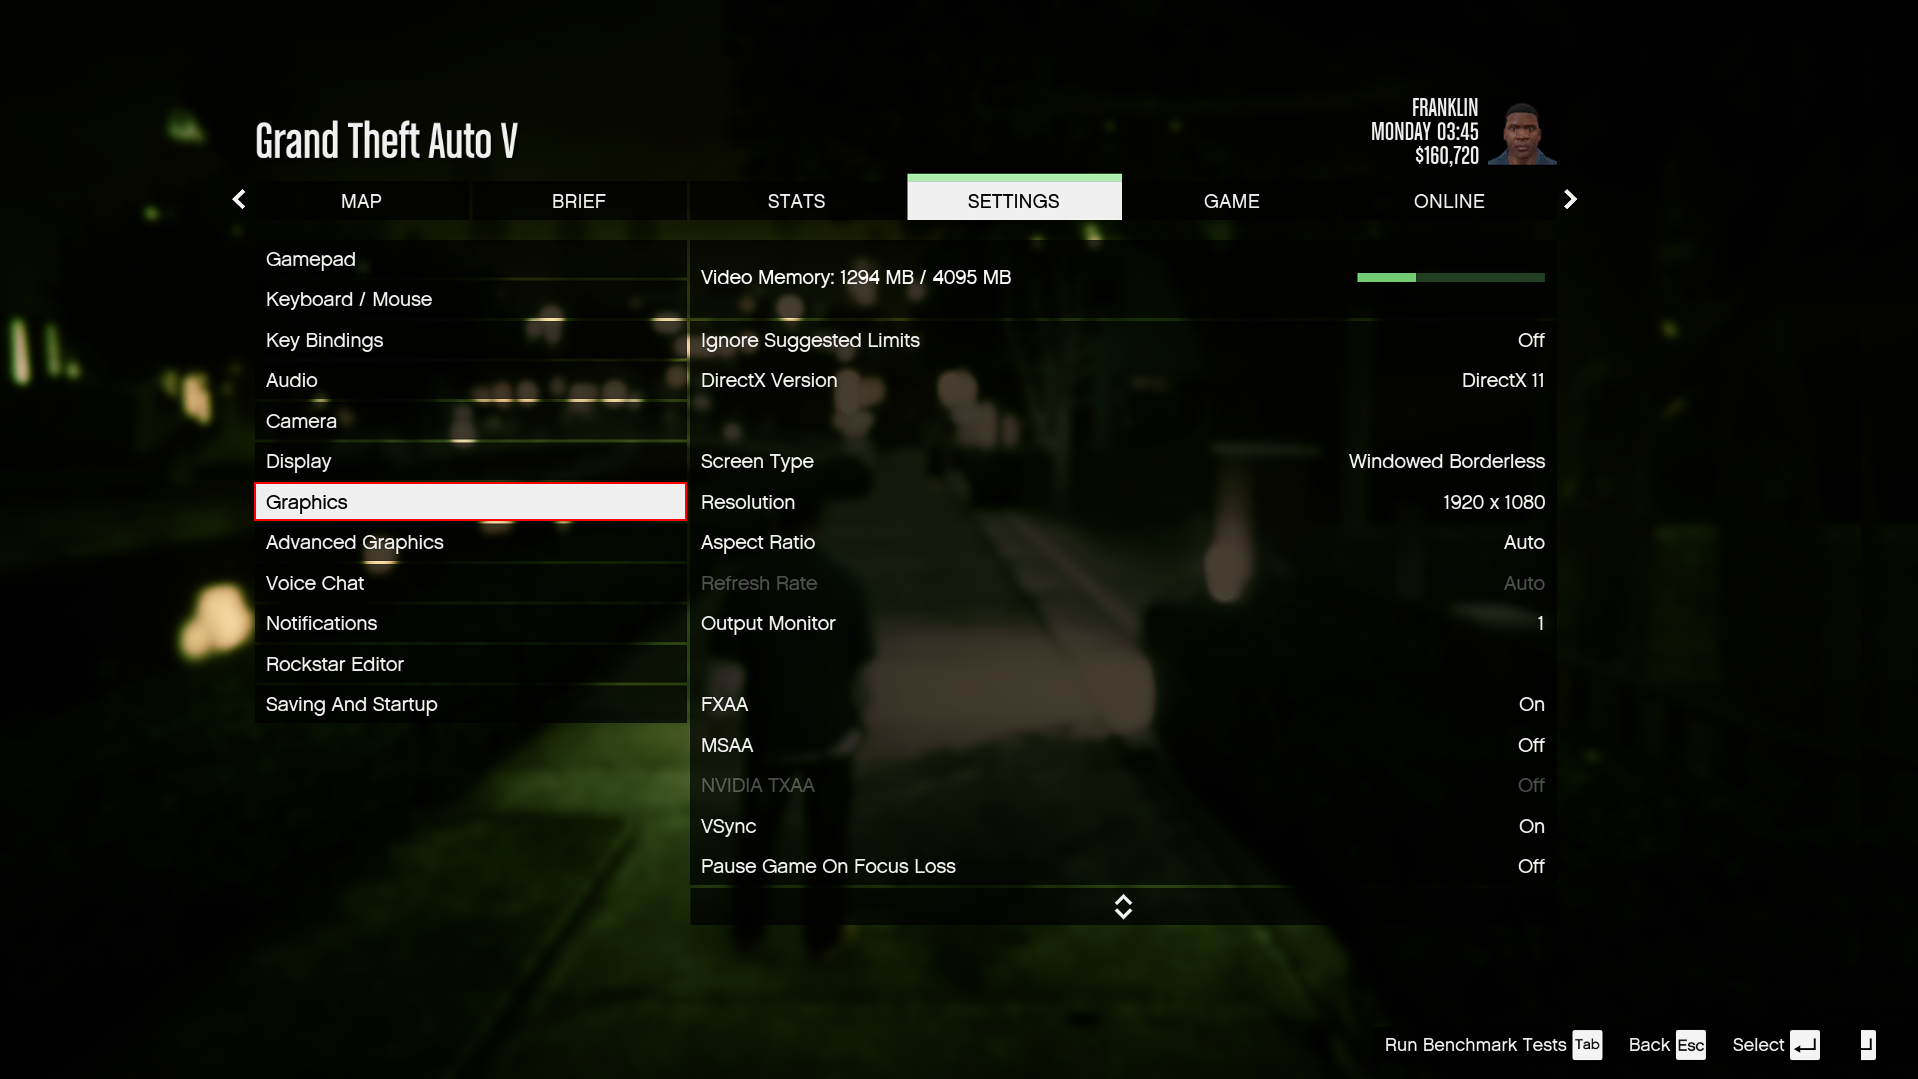 Grand Theft Auto V - How to Unlock Expanded and Enhanced Edition on PC - 2 - Open the graphics settings - 5594898